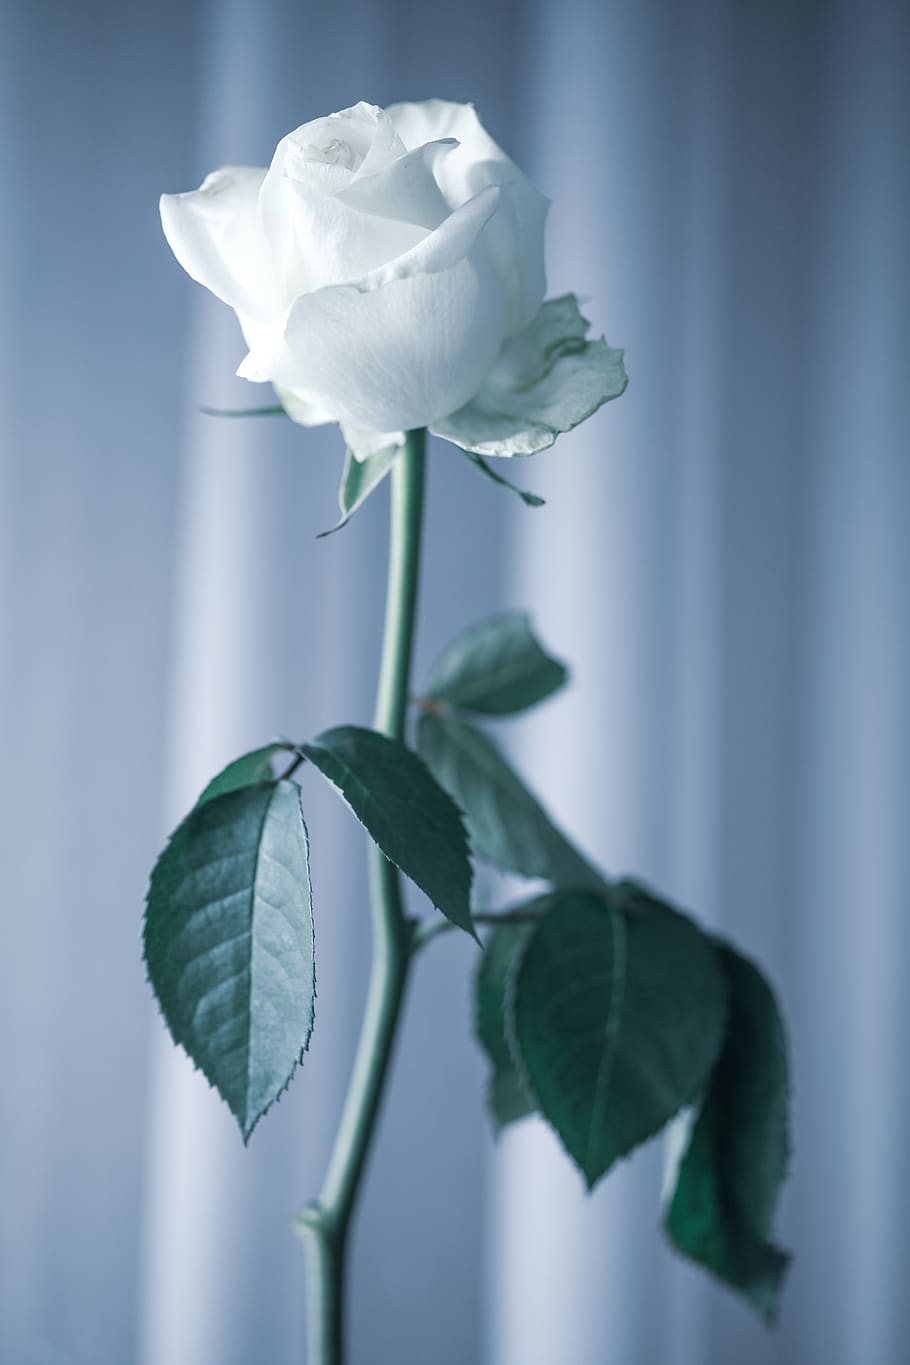 rose, transience, mourning, cold, past, romance, antique, romantic, beauty in nature, plant